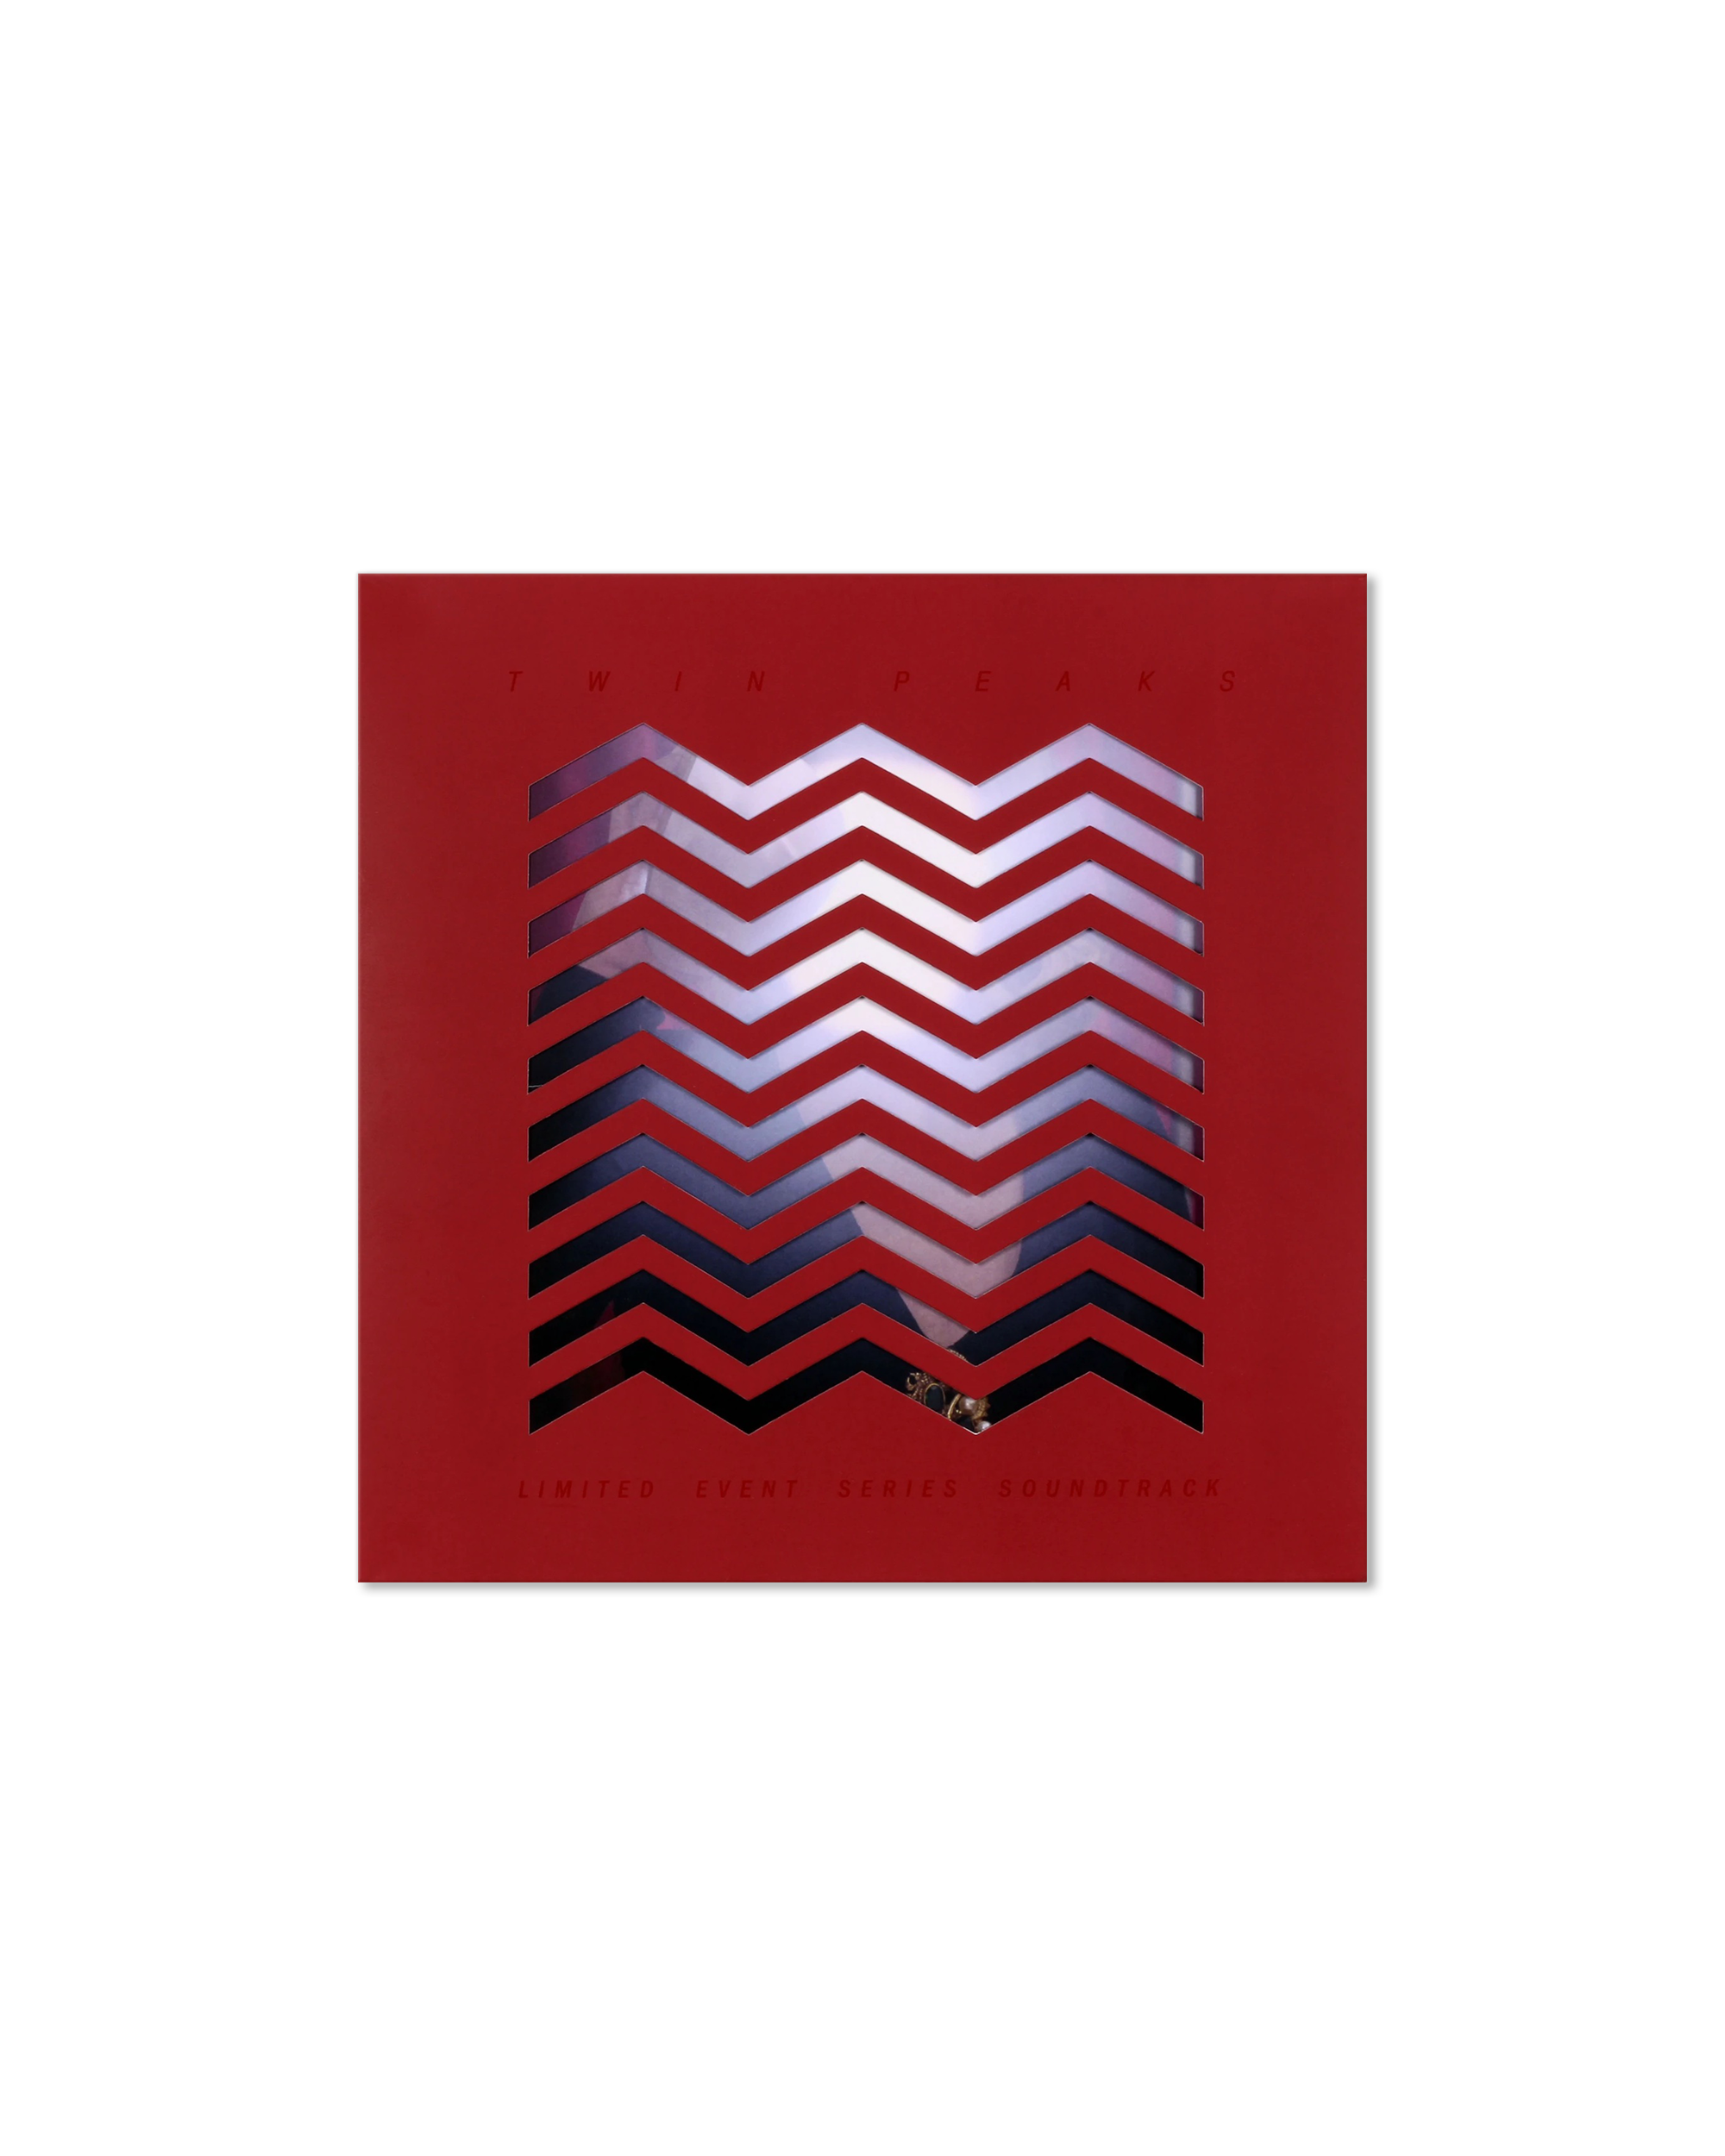 Twin Peaks - Limited event Series